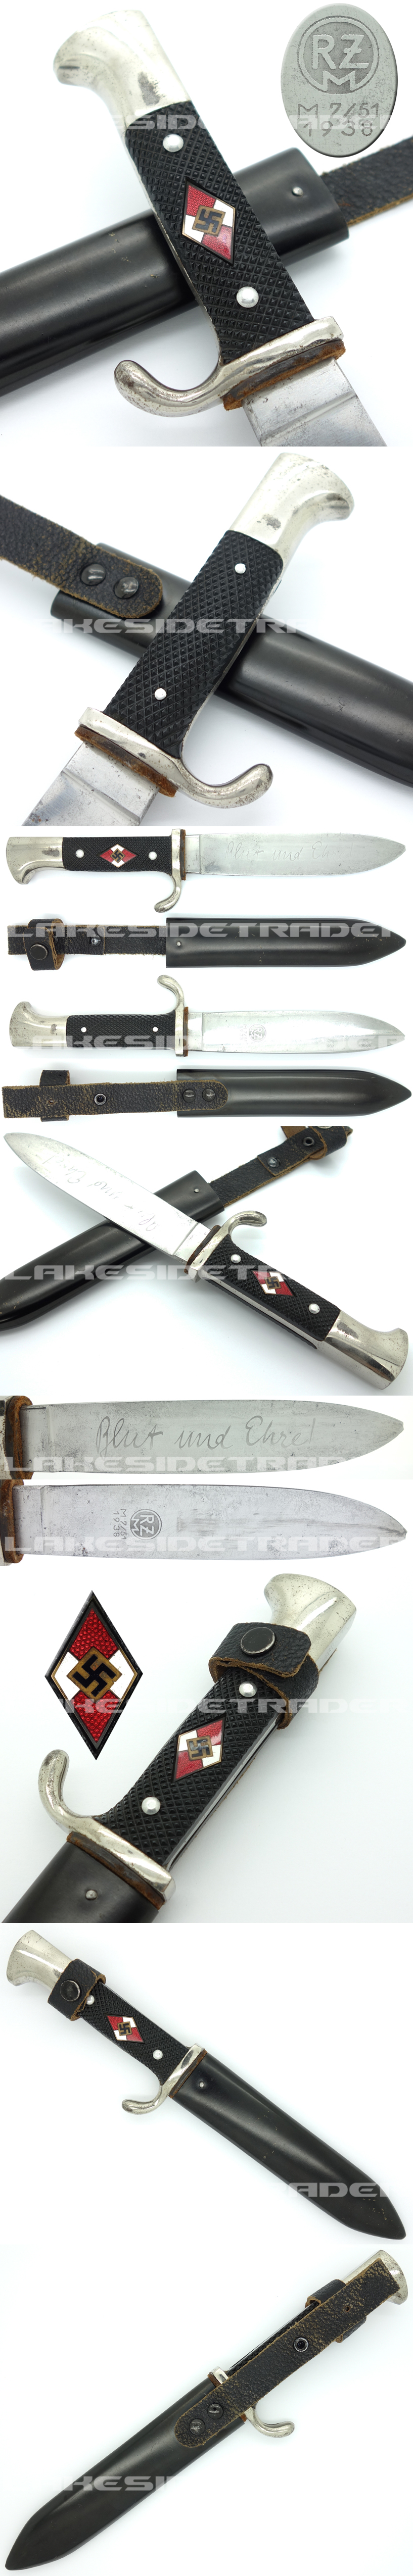 Transitional Hitler Youth Knife by RZM M7/51 1938